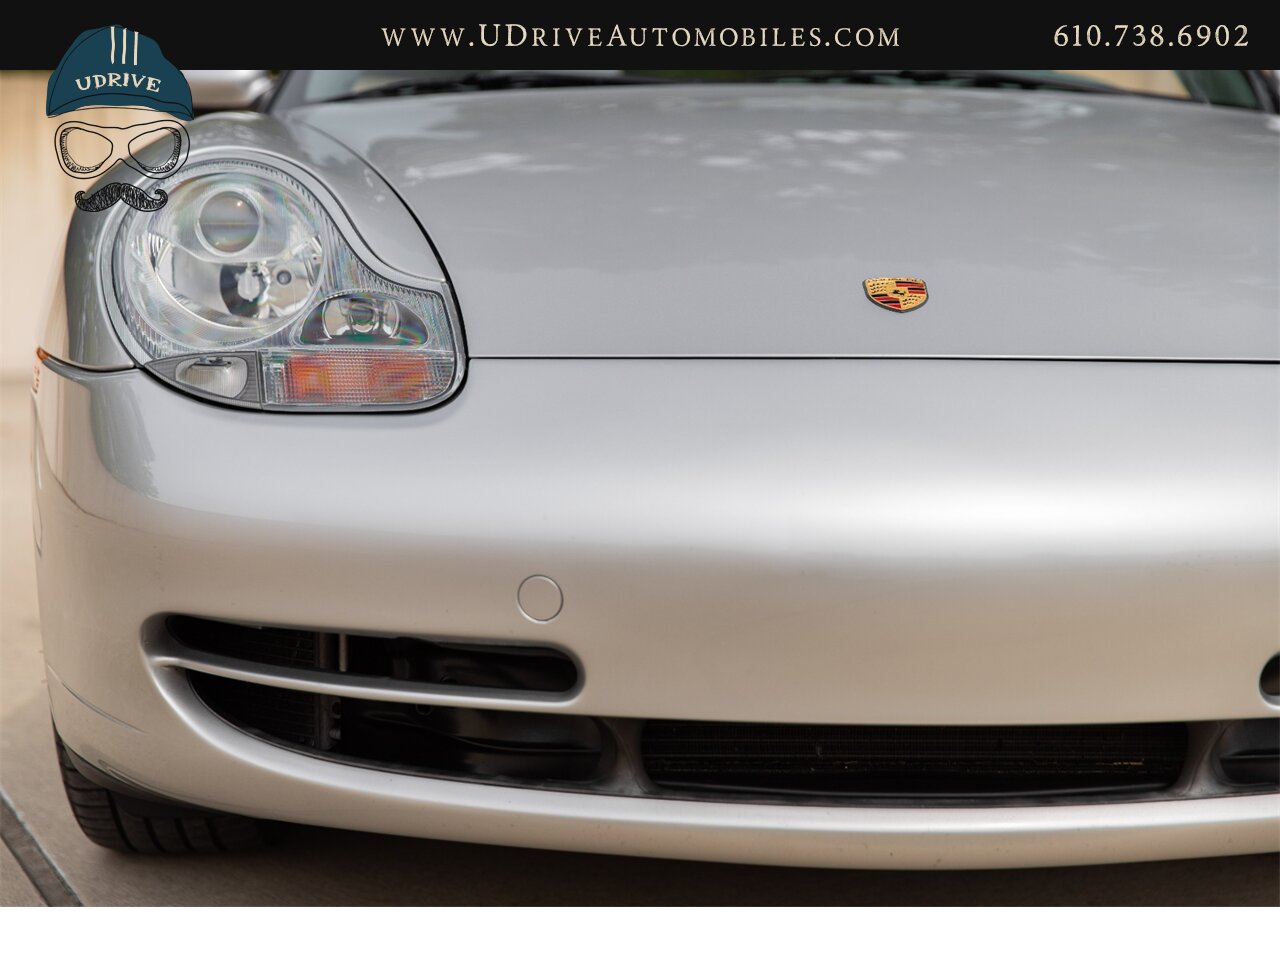 2001 Porsche 911 Carrera 4 Cabriolet Tiptronic IMS Upgrade  Power Seats 18in Turbo Look Wheels 2 Owners $5k Recent Service - Photo 16 - West Chester, PA 19382